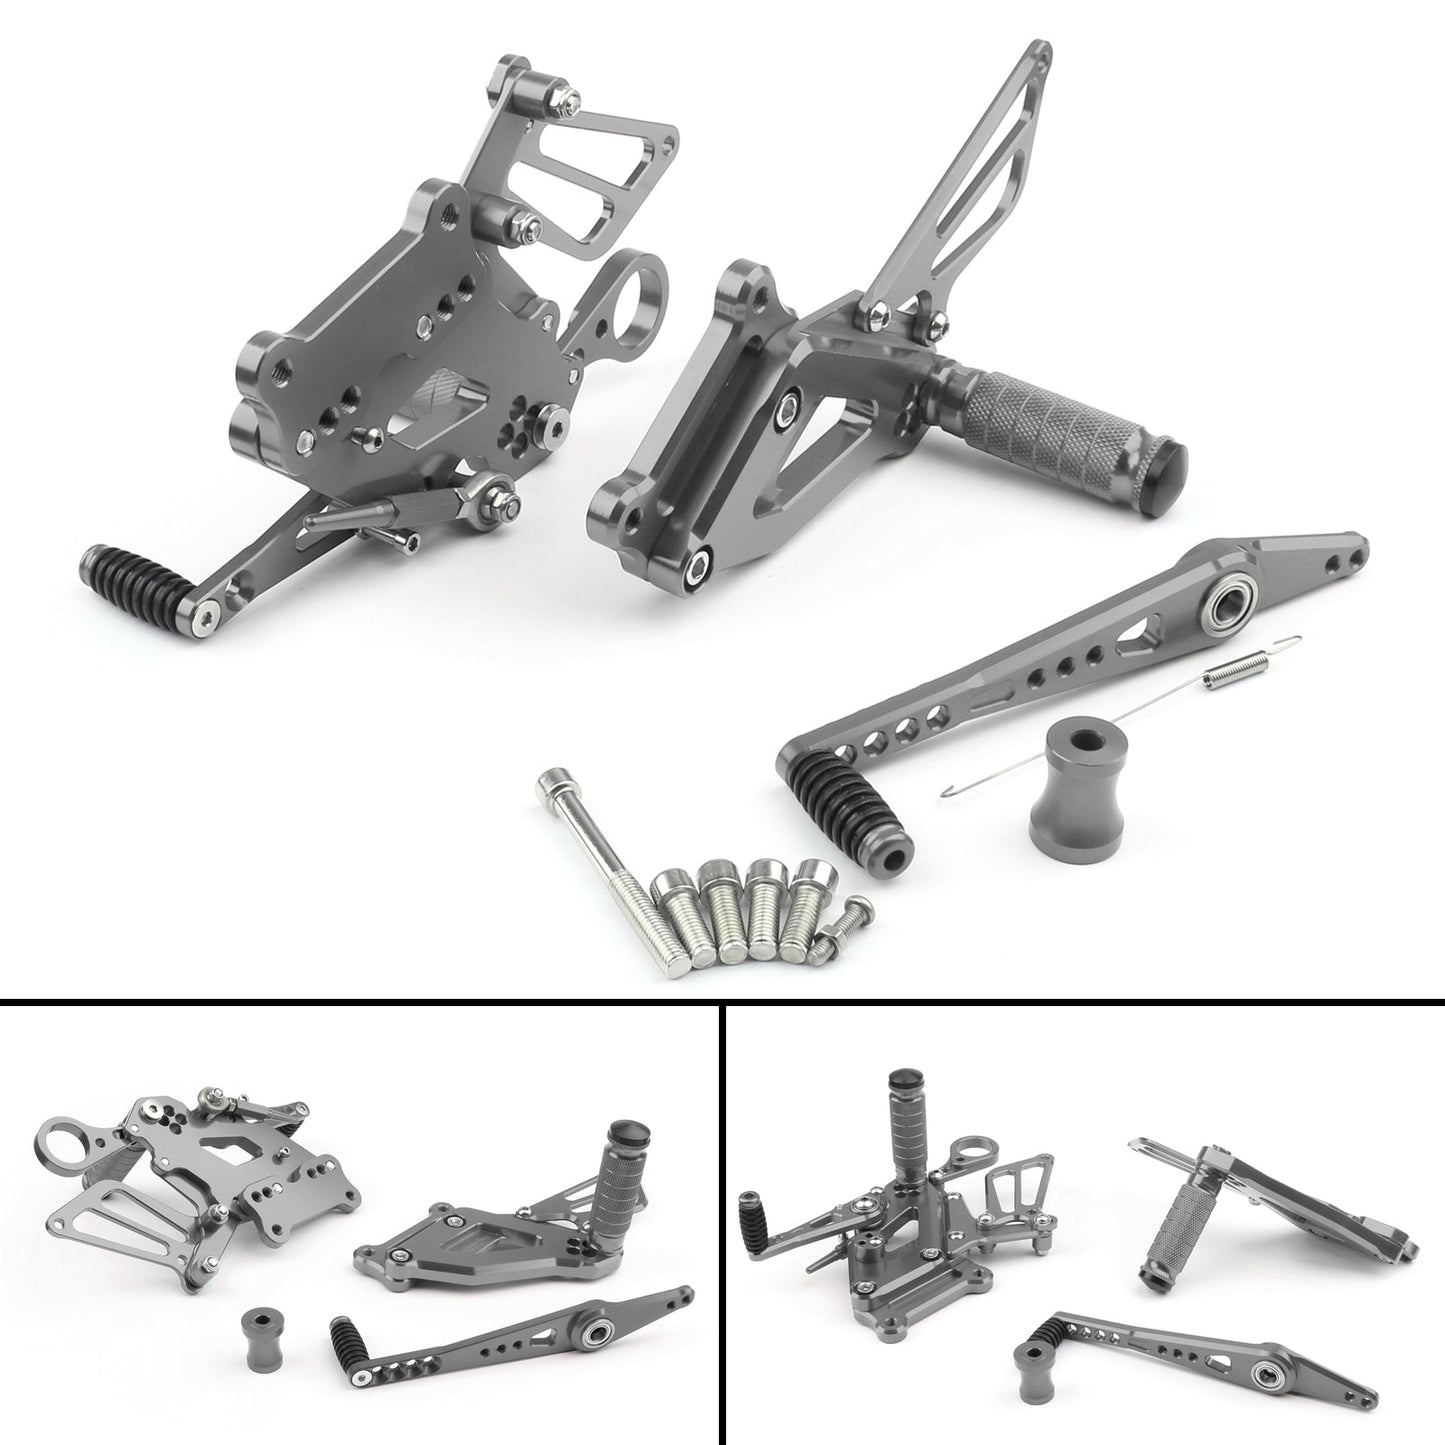 2015-2017 BMW S1000RR Motorcycle CNC Footrests Rear Sets Foot Pegs